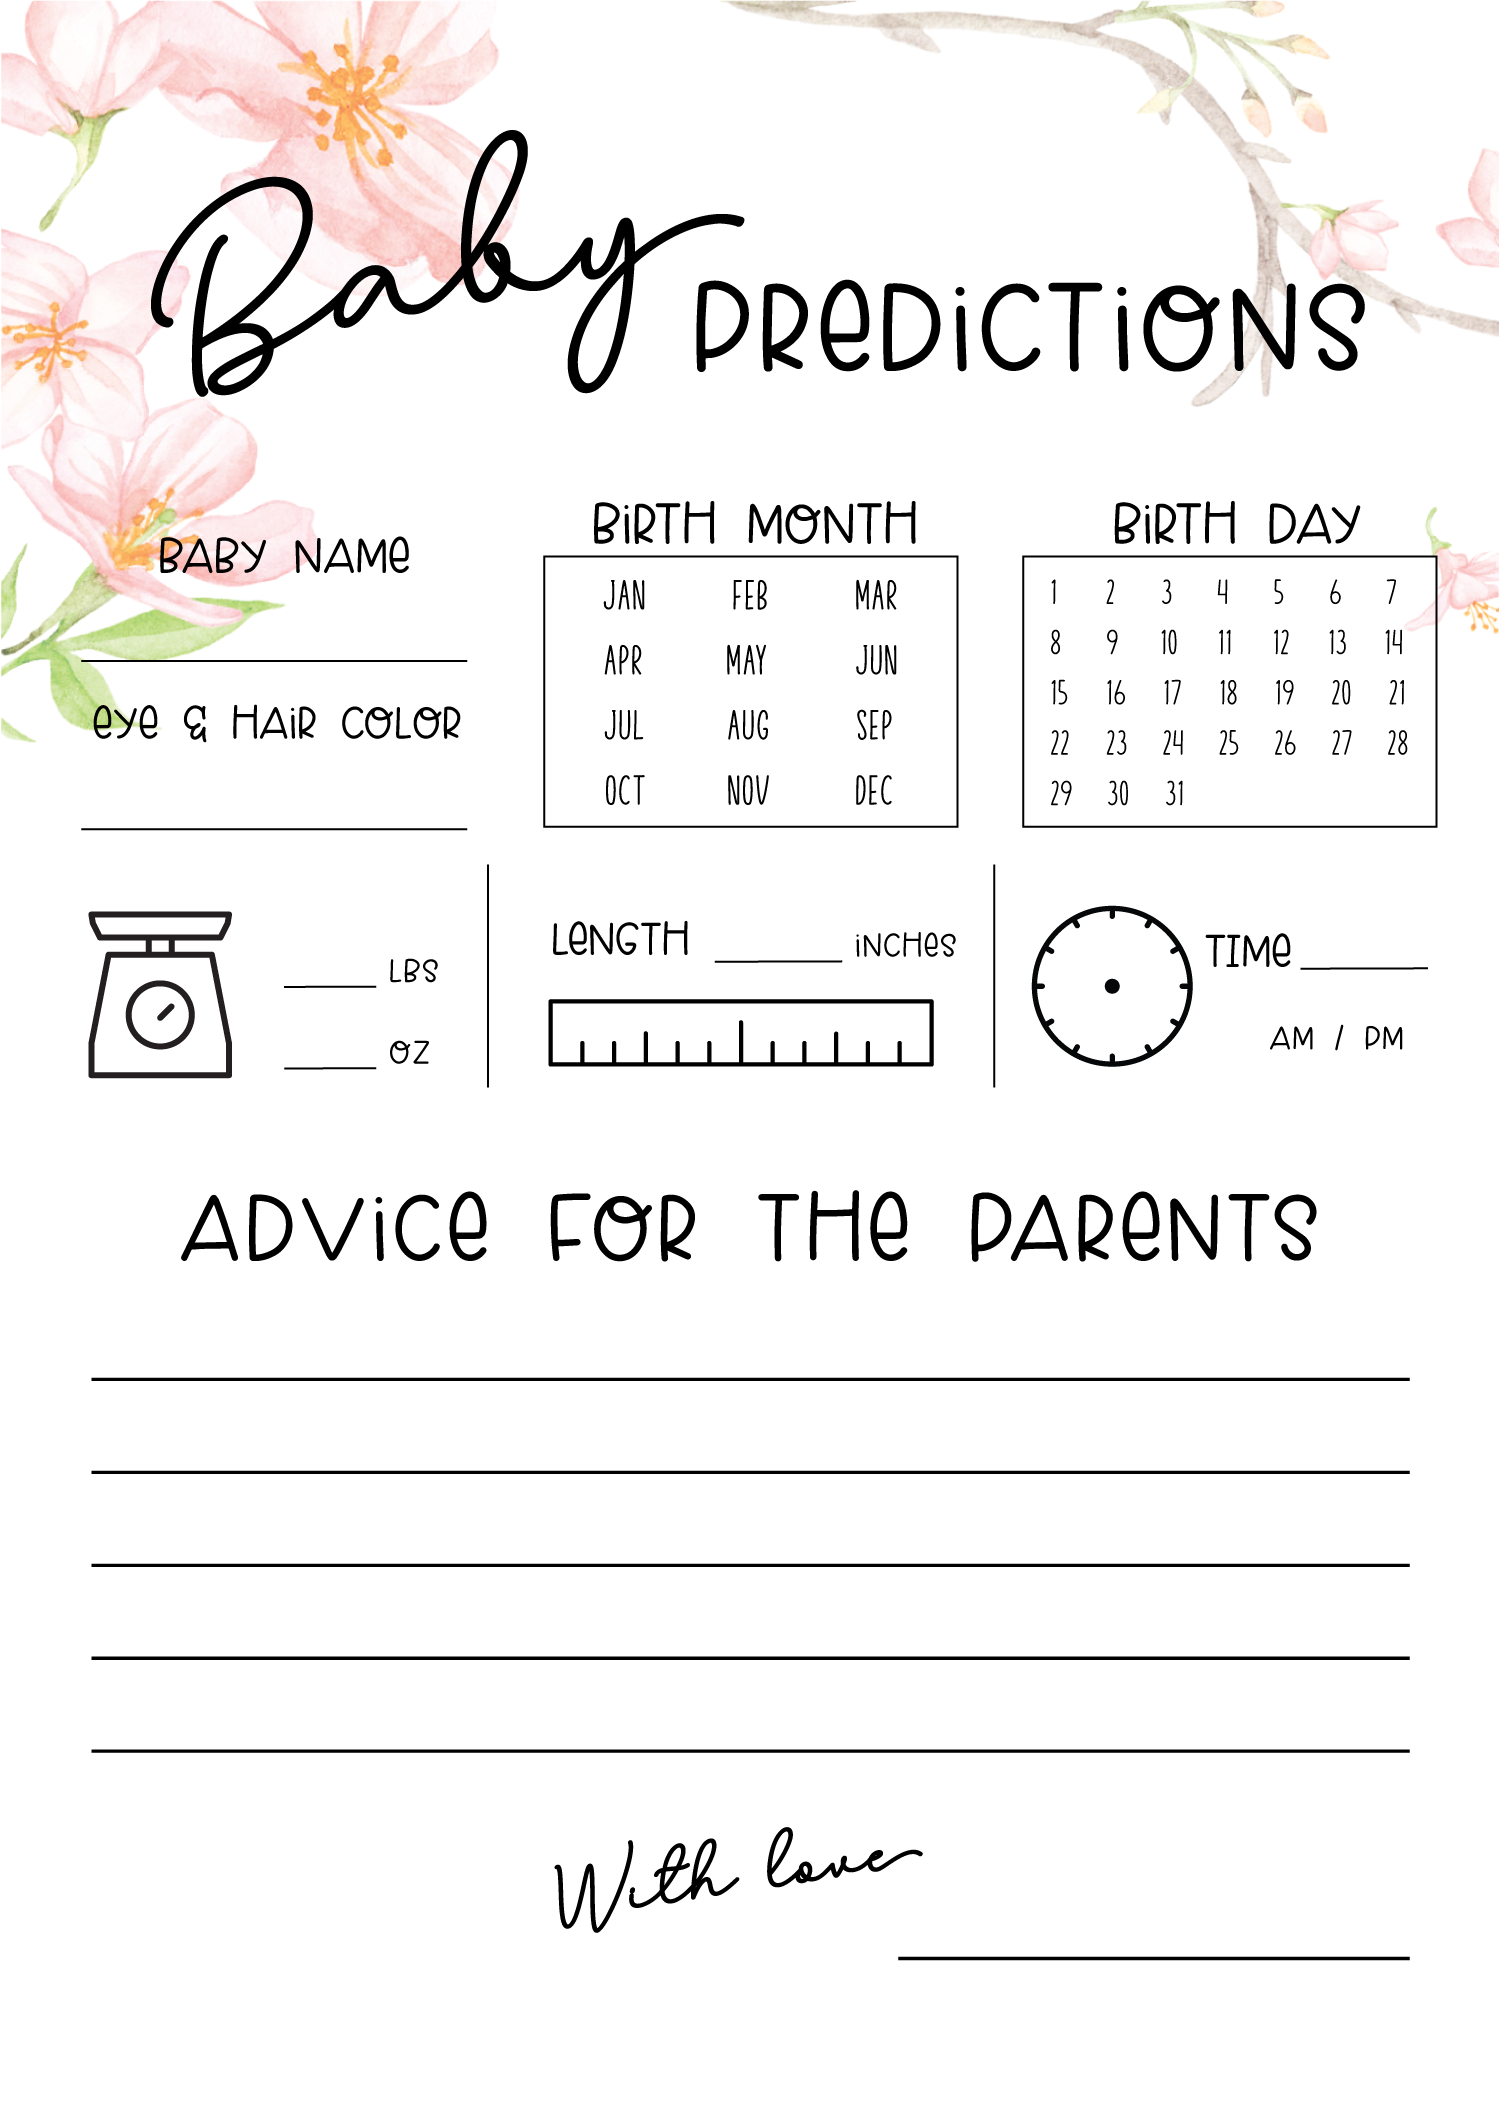 baby shower predictions sheets